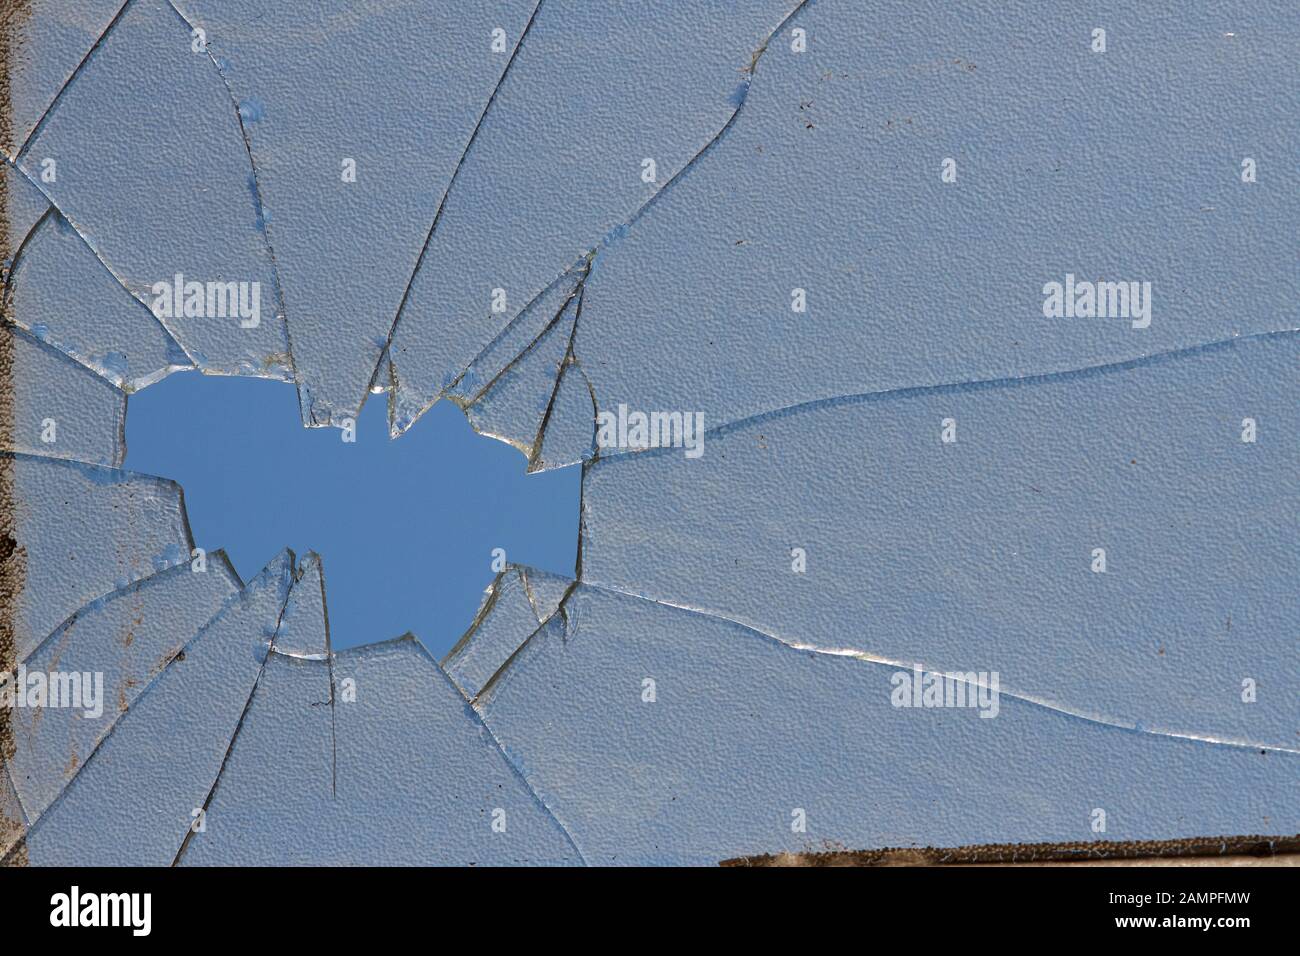 Dirty cracked glass background texture. Stock Photo